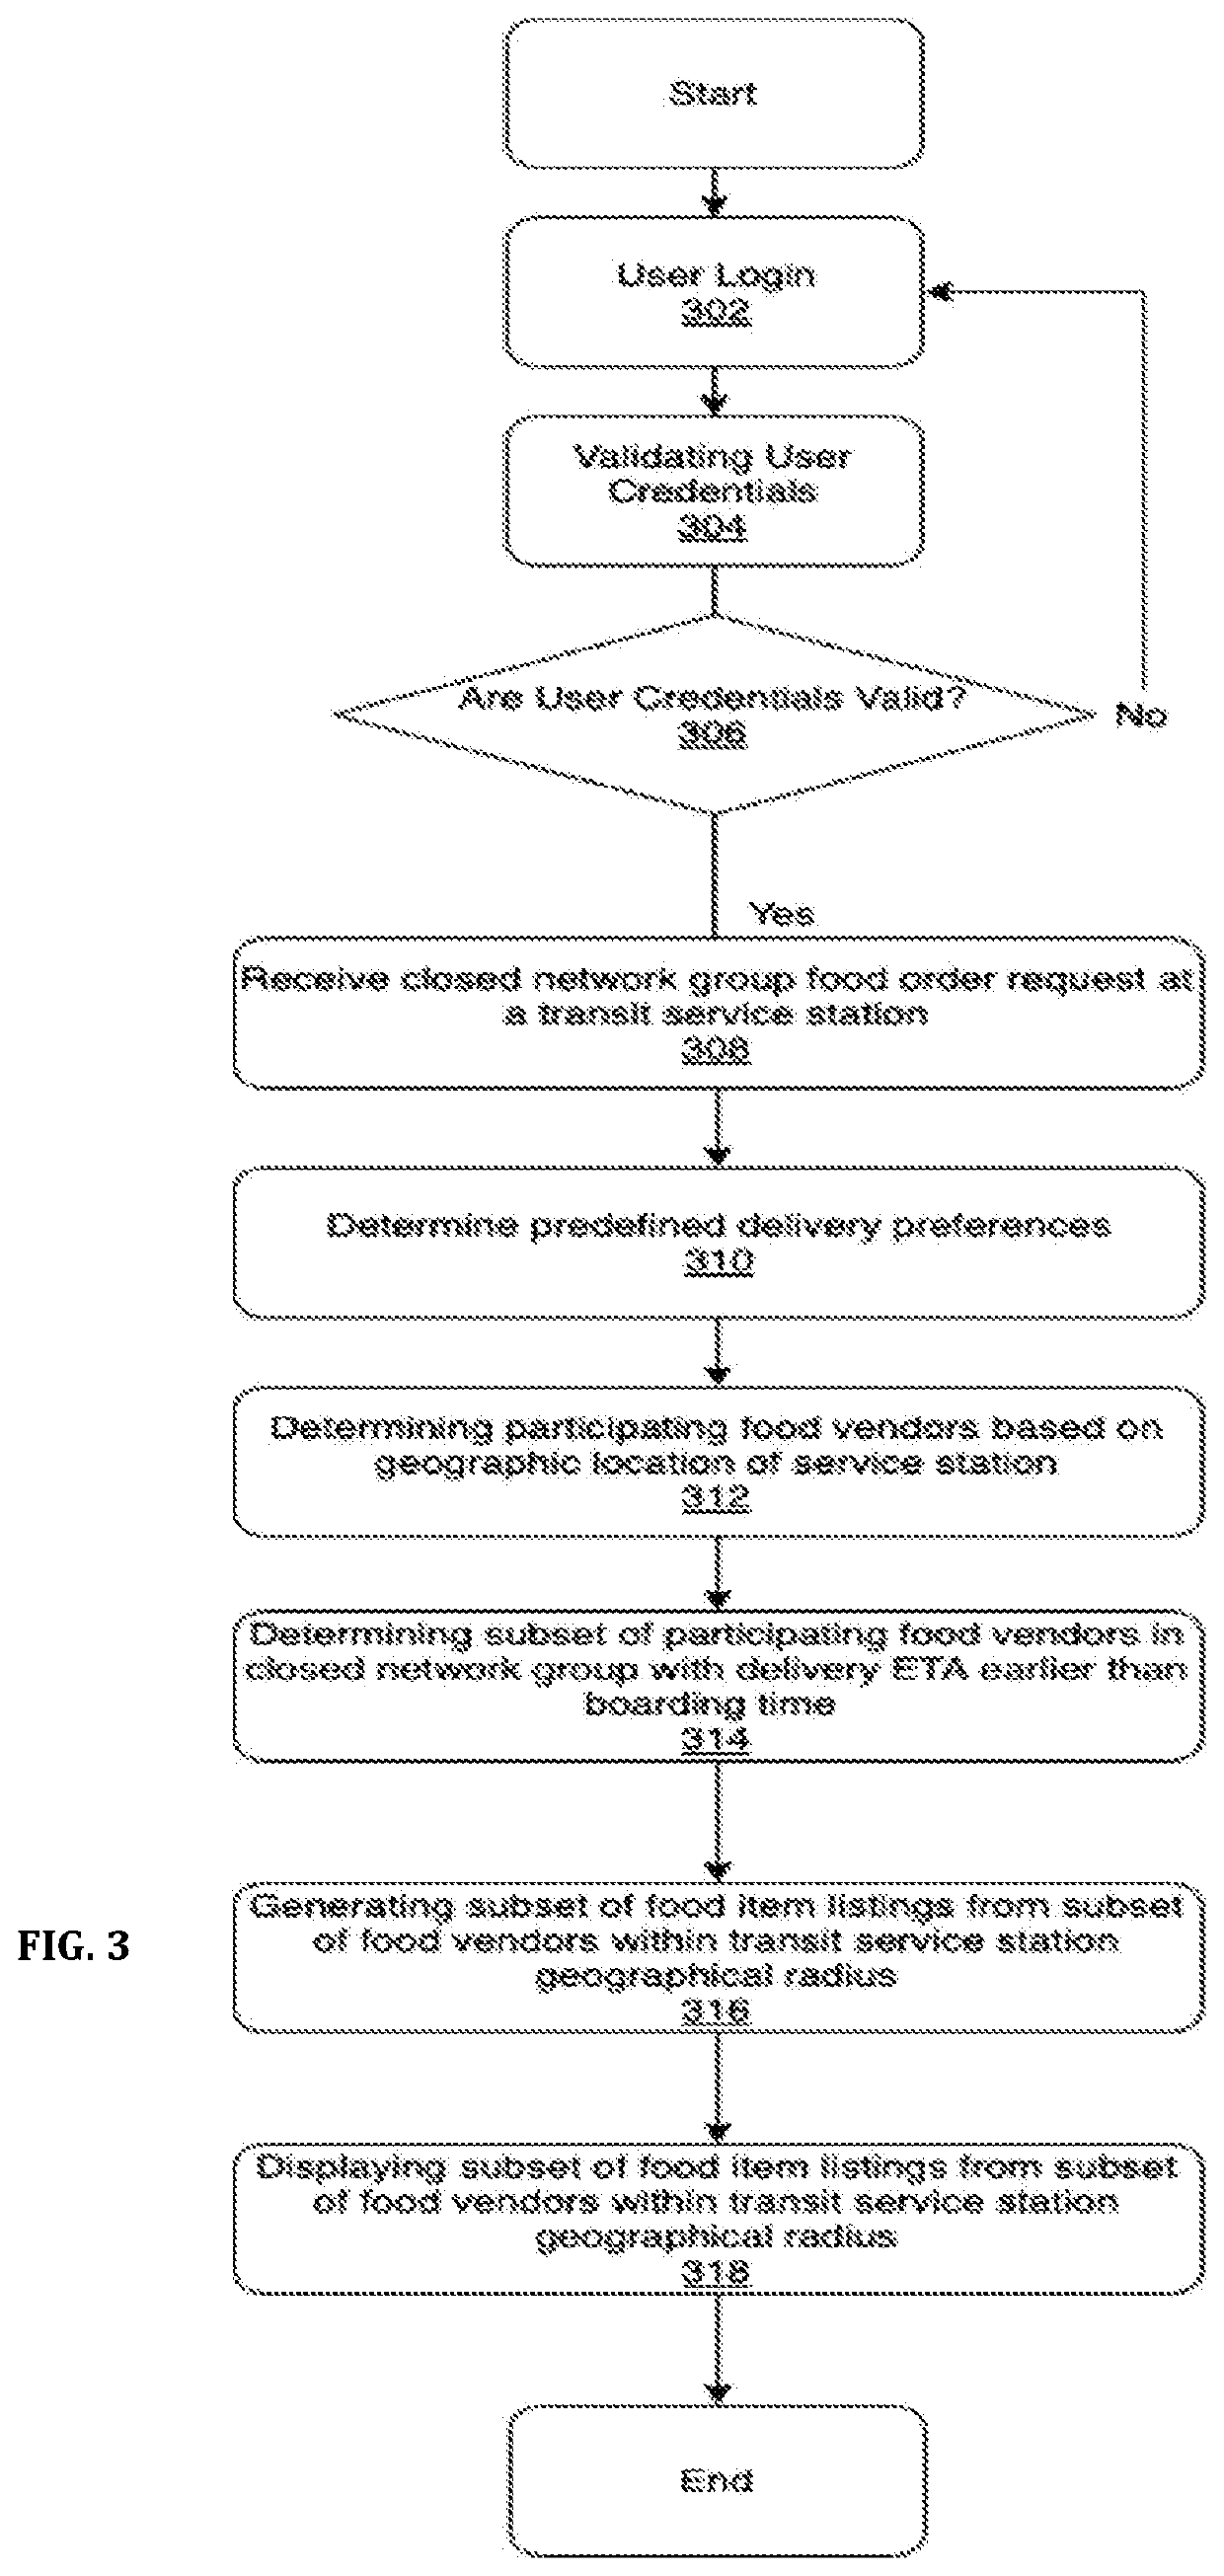 Method and apparatus for preorder of food items in a closed network group at a transit service station